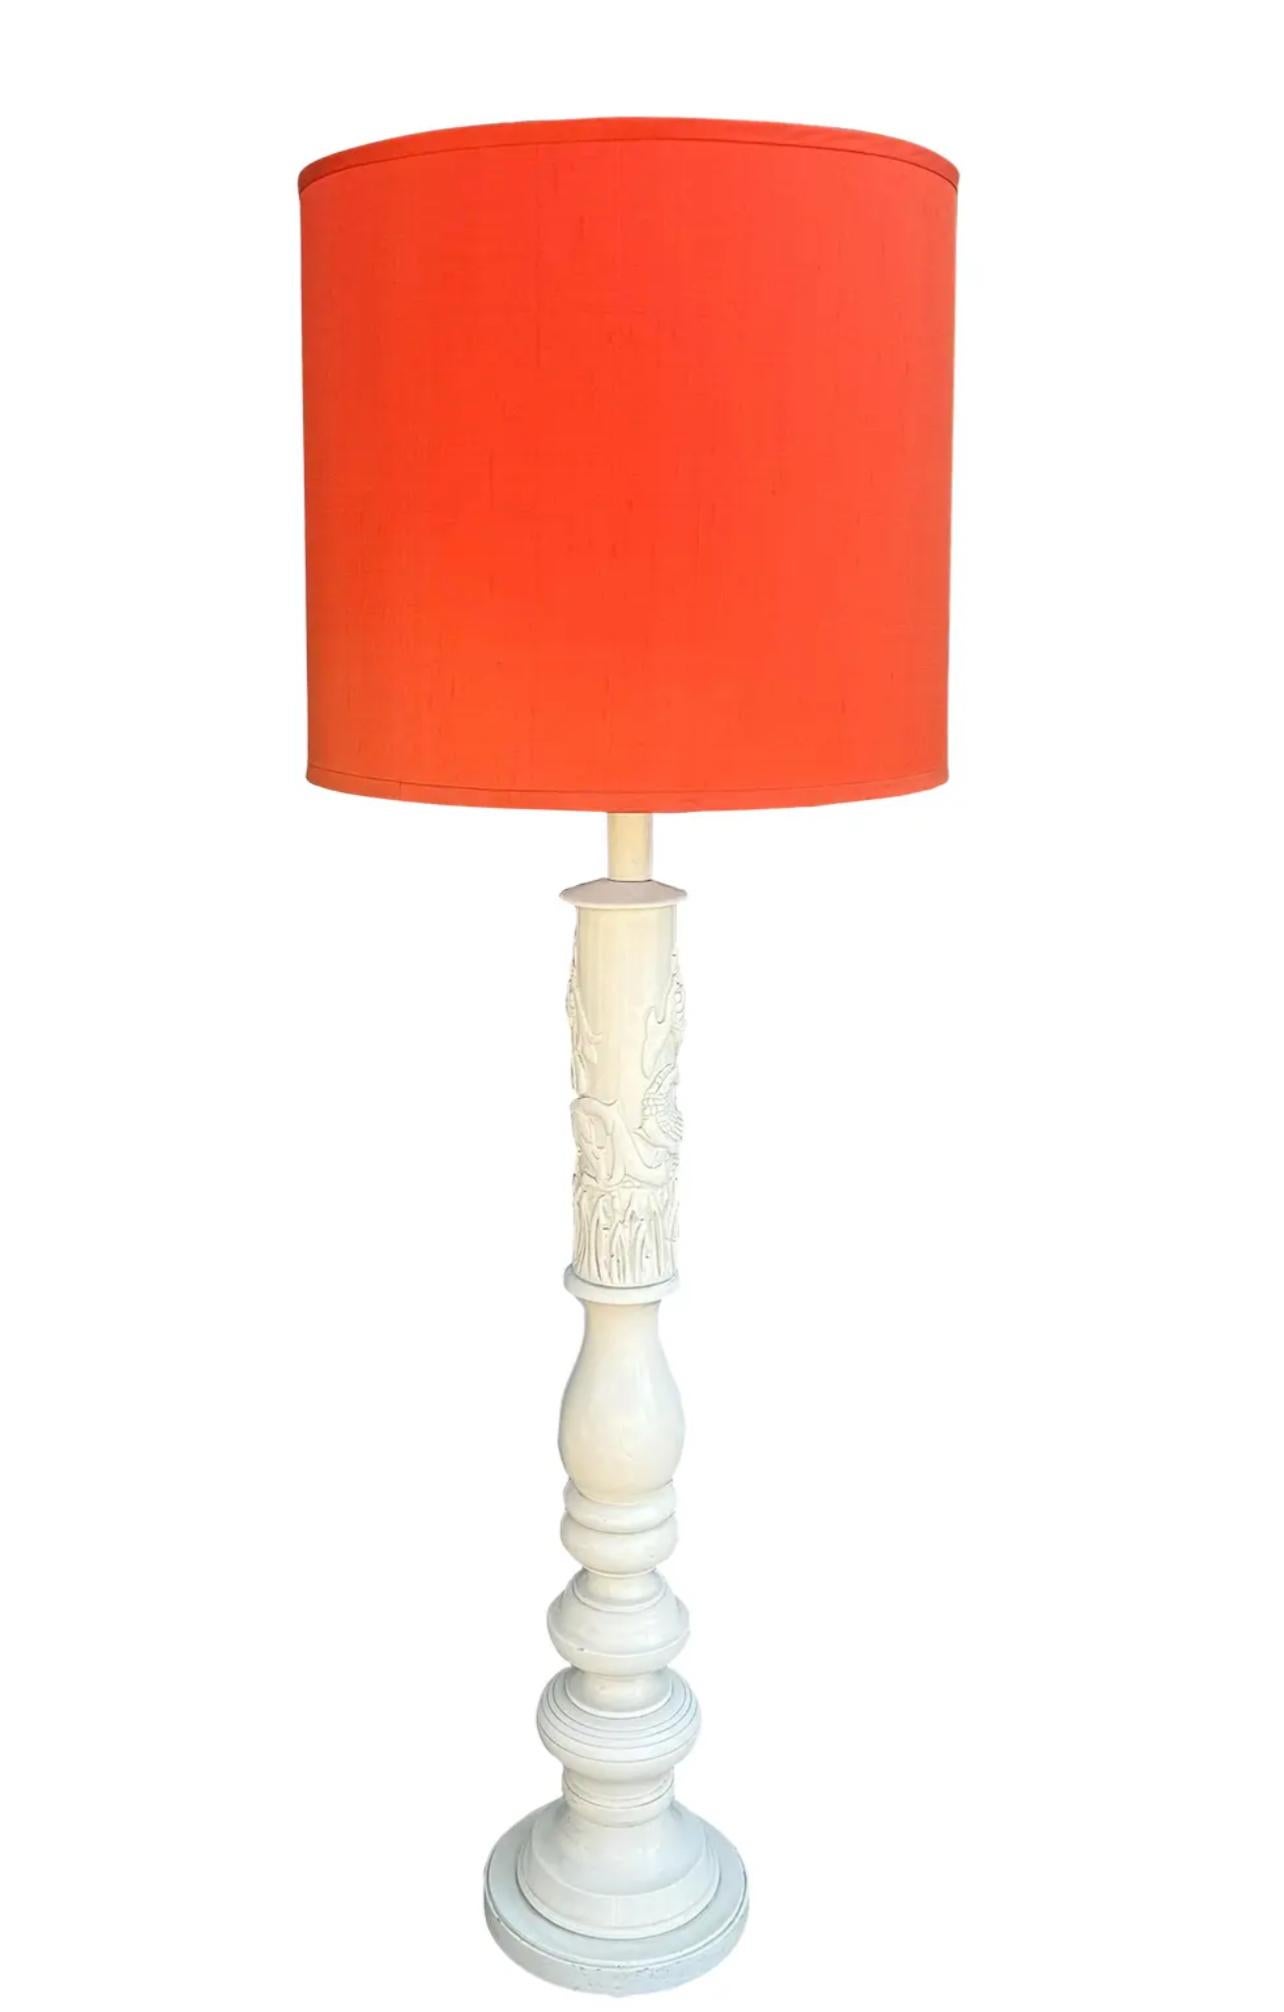 Chinese Mid Century Modern Carved Dragon White Lacquer Floor Lamp W Orange Shade For Sale